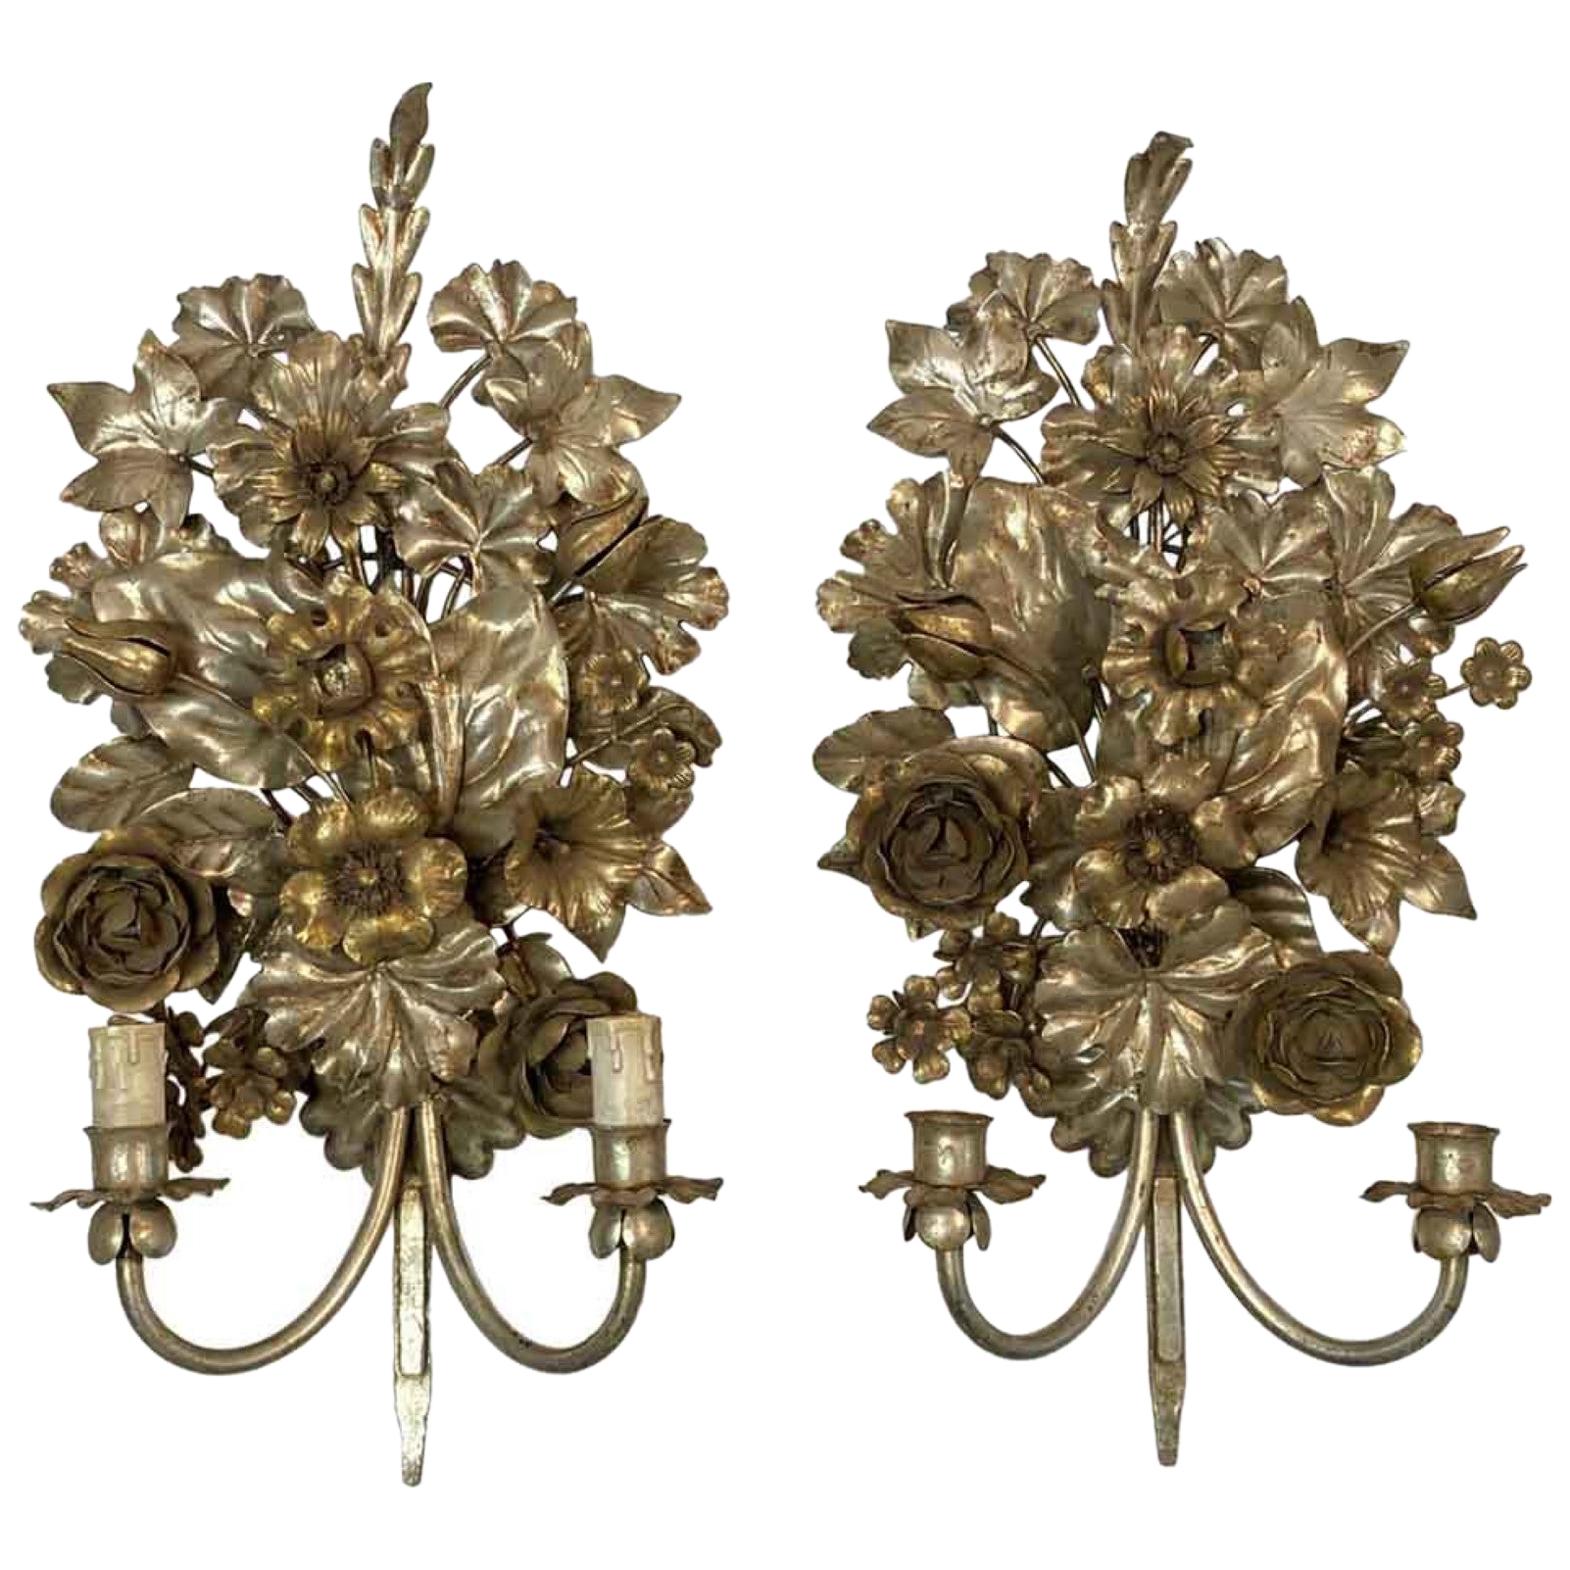 1990s Pair of Hollywood Regency Italian Wall Sconces Done in a Silver Gilt